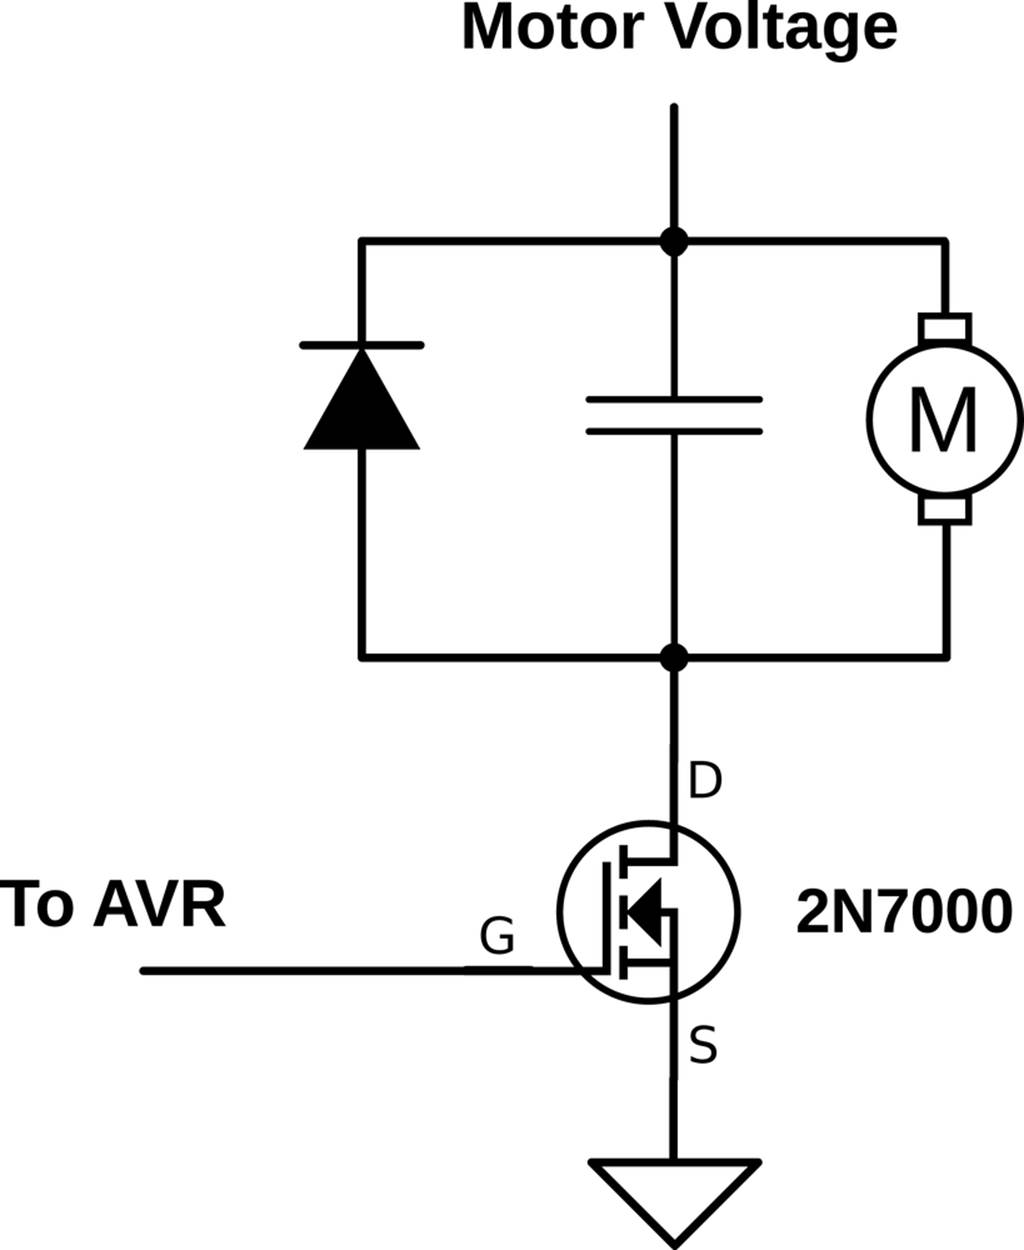 DC Motor with low-side MOSFET switch